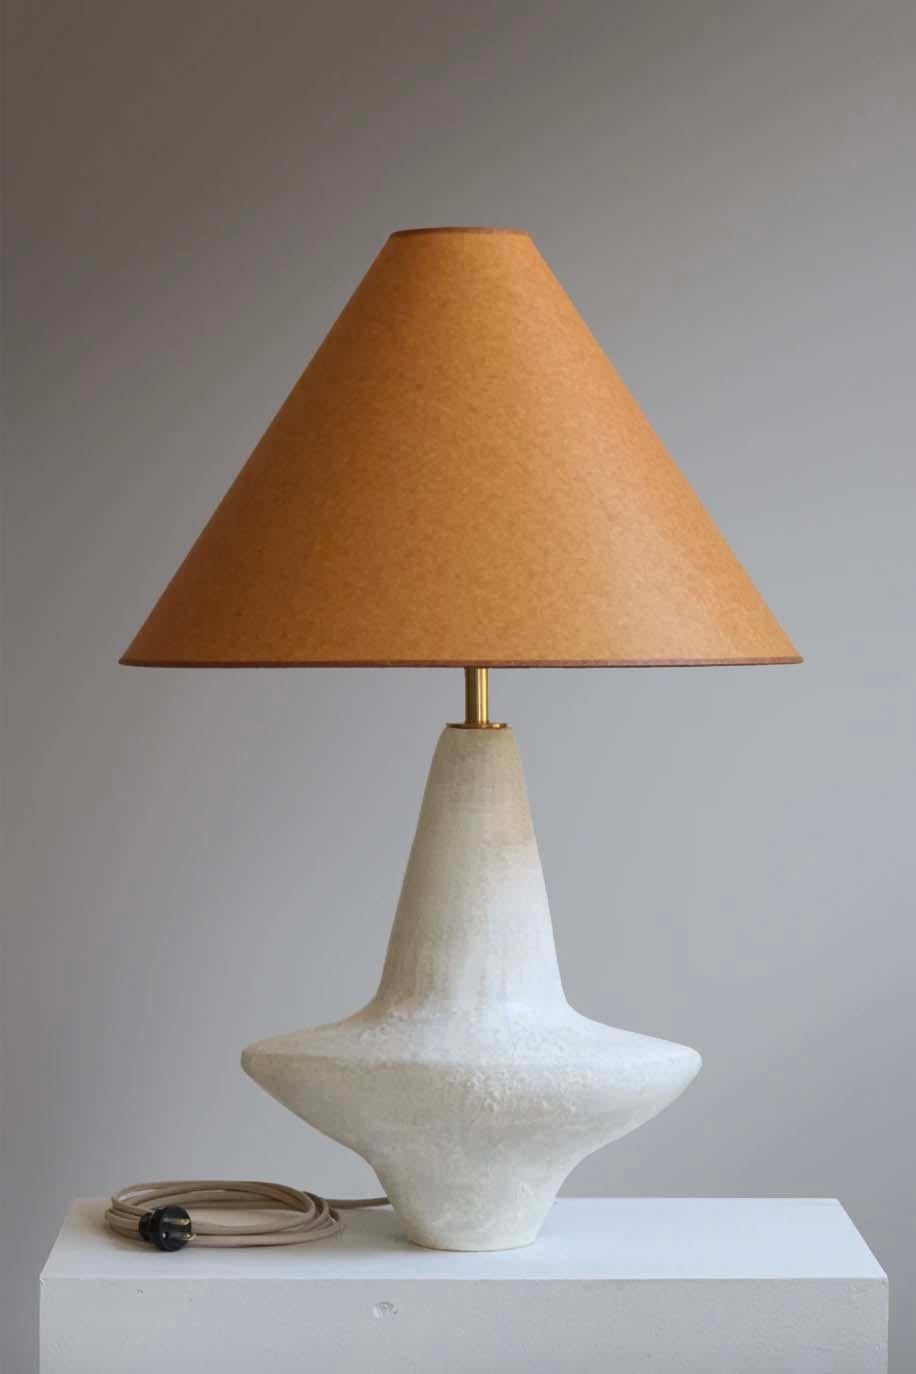 The Wing lamp is handmade studio pottery by ceramic artist by Danny Kaplan. Shade included. Please note exact dimensions may vary.

Born in New York City and raised in Aix-en-Provence, France, Danny Kaplan’s passion for ceramics was shaped by